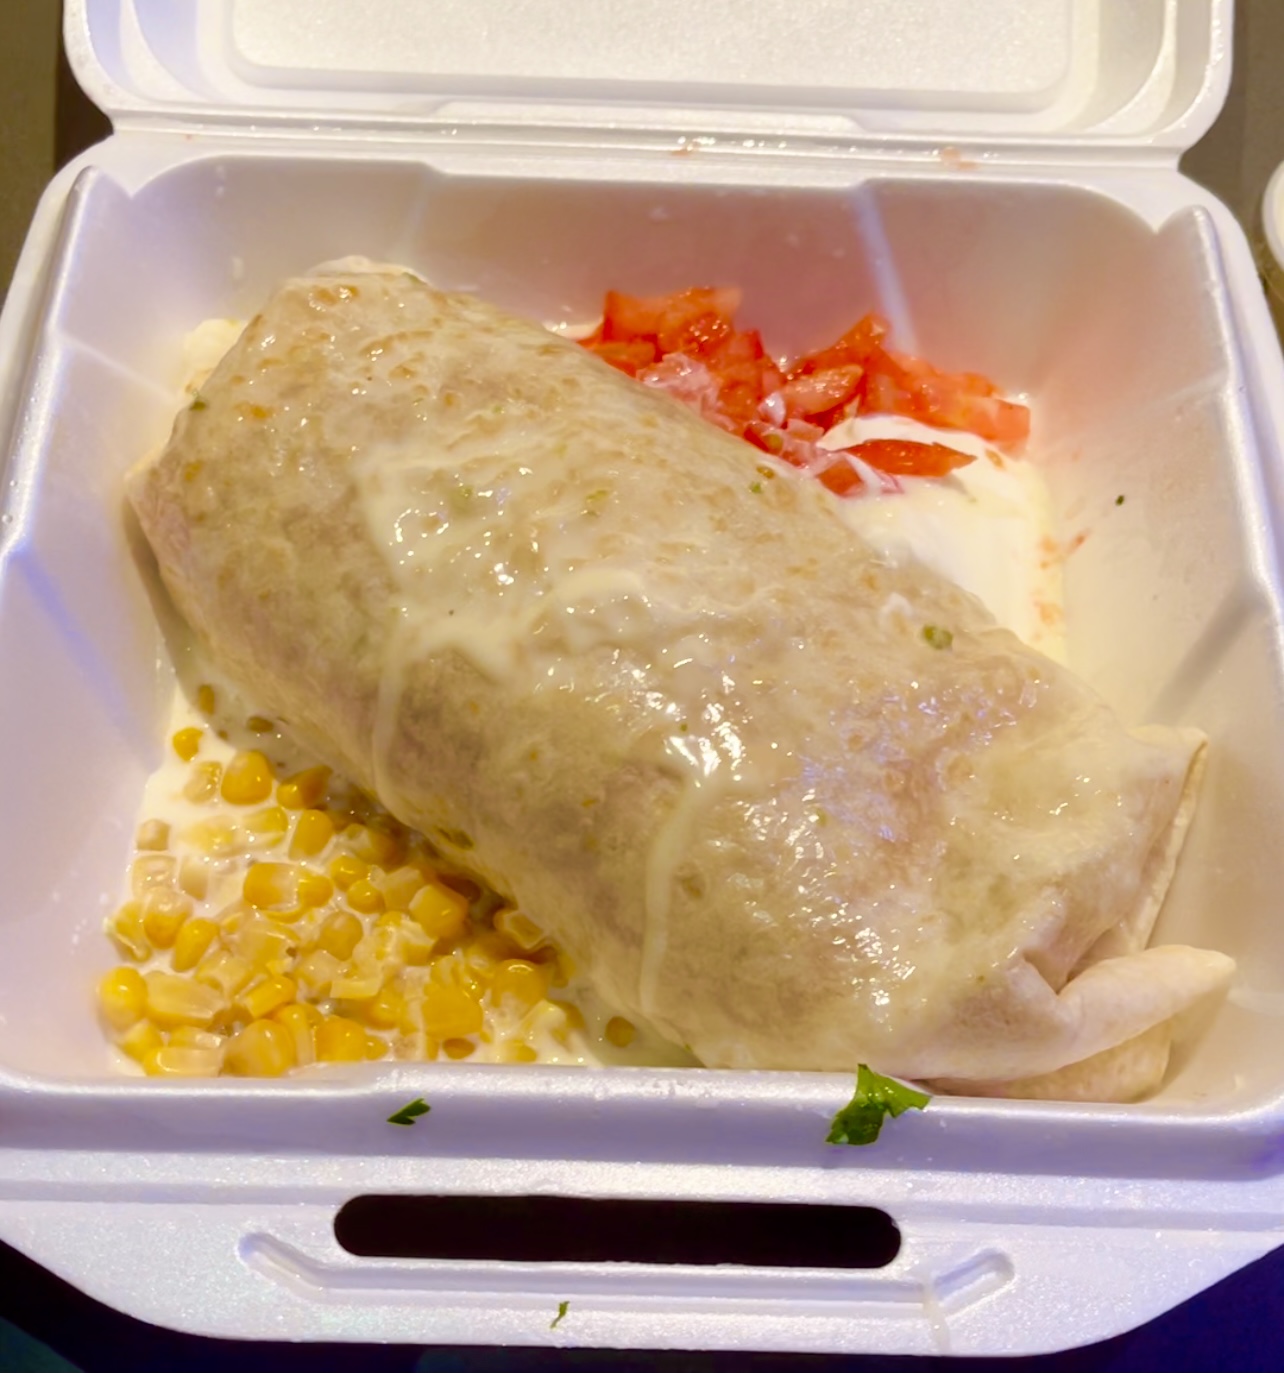 In a white styrofoam container, there is a huge burrito diagonally covering the whole container with a scoop of corn kernels and diced tomatoes on either side. Photo by Stephanie Wheatley.